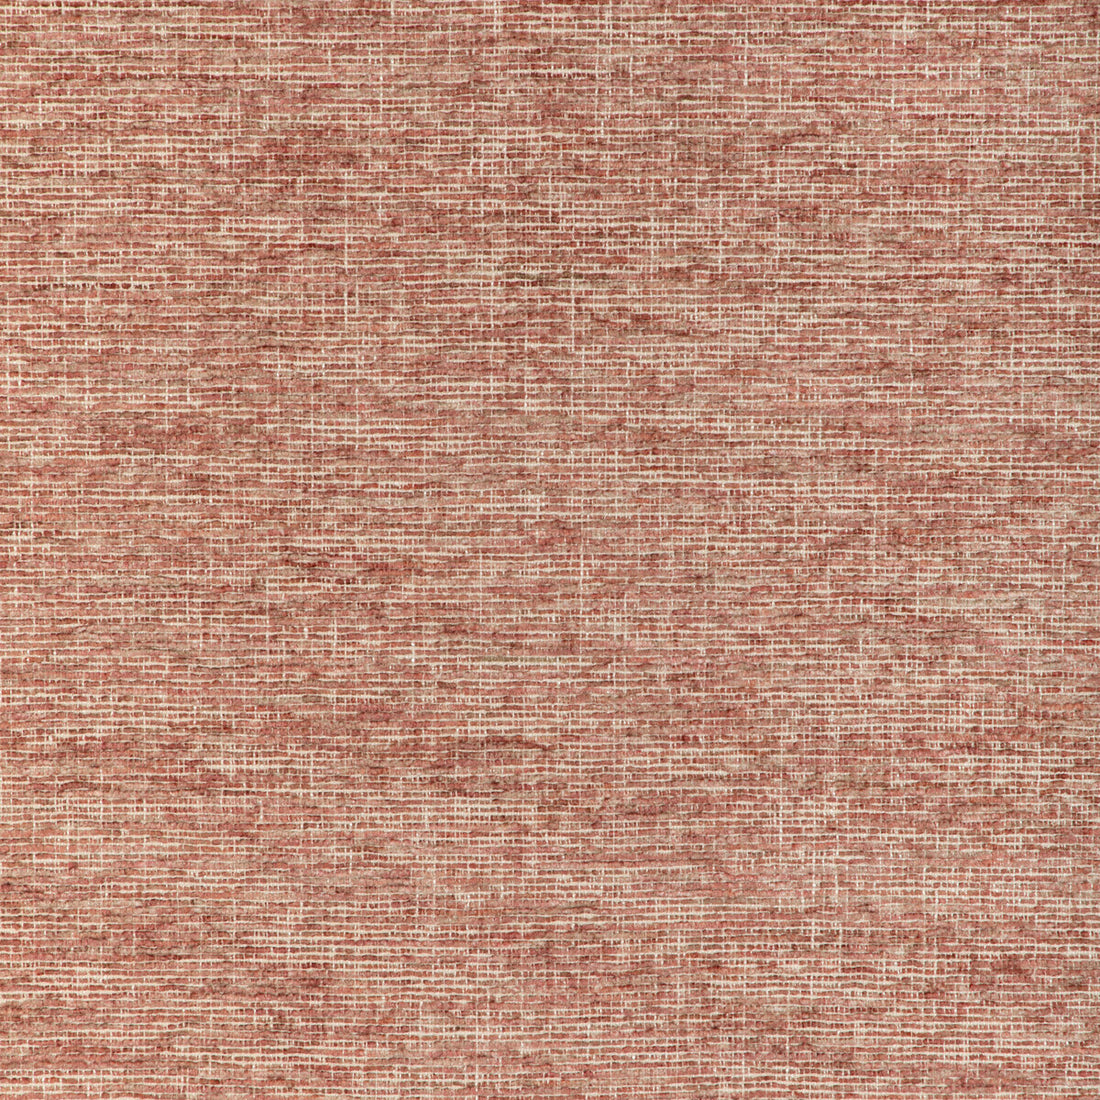 Chenille Aura fabric in rose color - pattern 36871.12.0 - by Kravet Couture in the Atelier Weaves collection